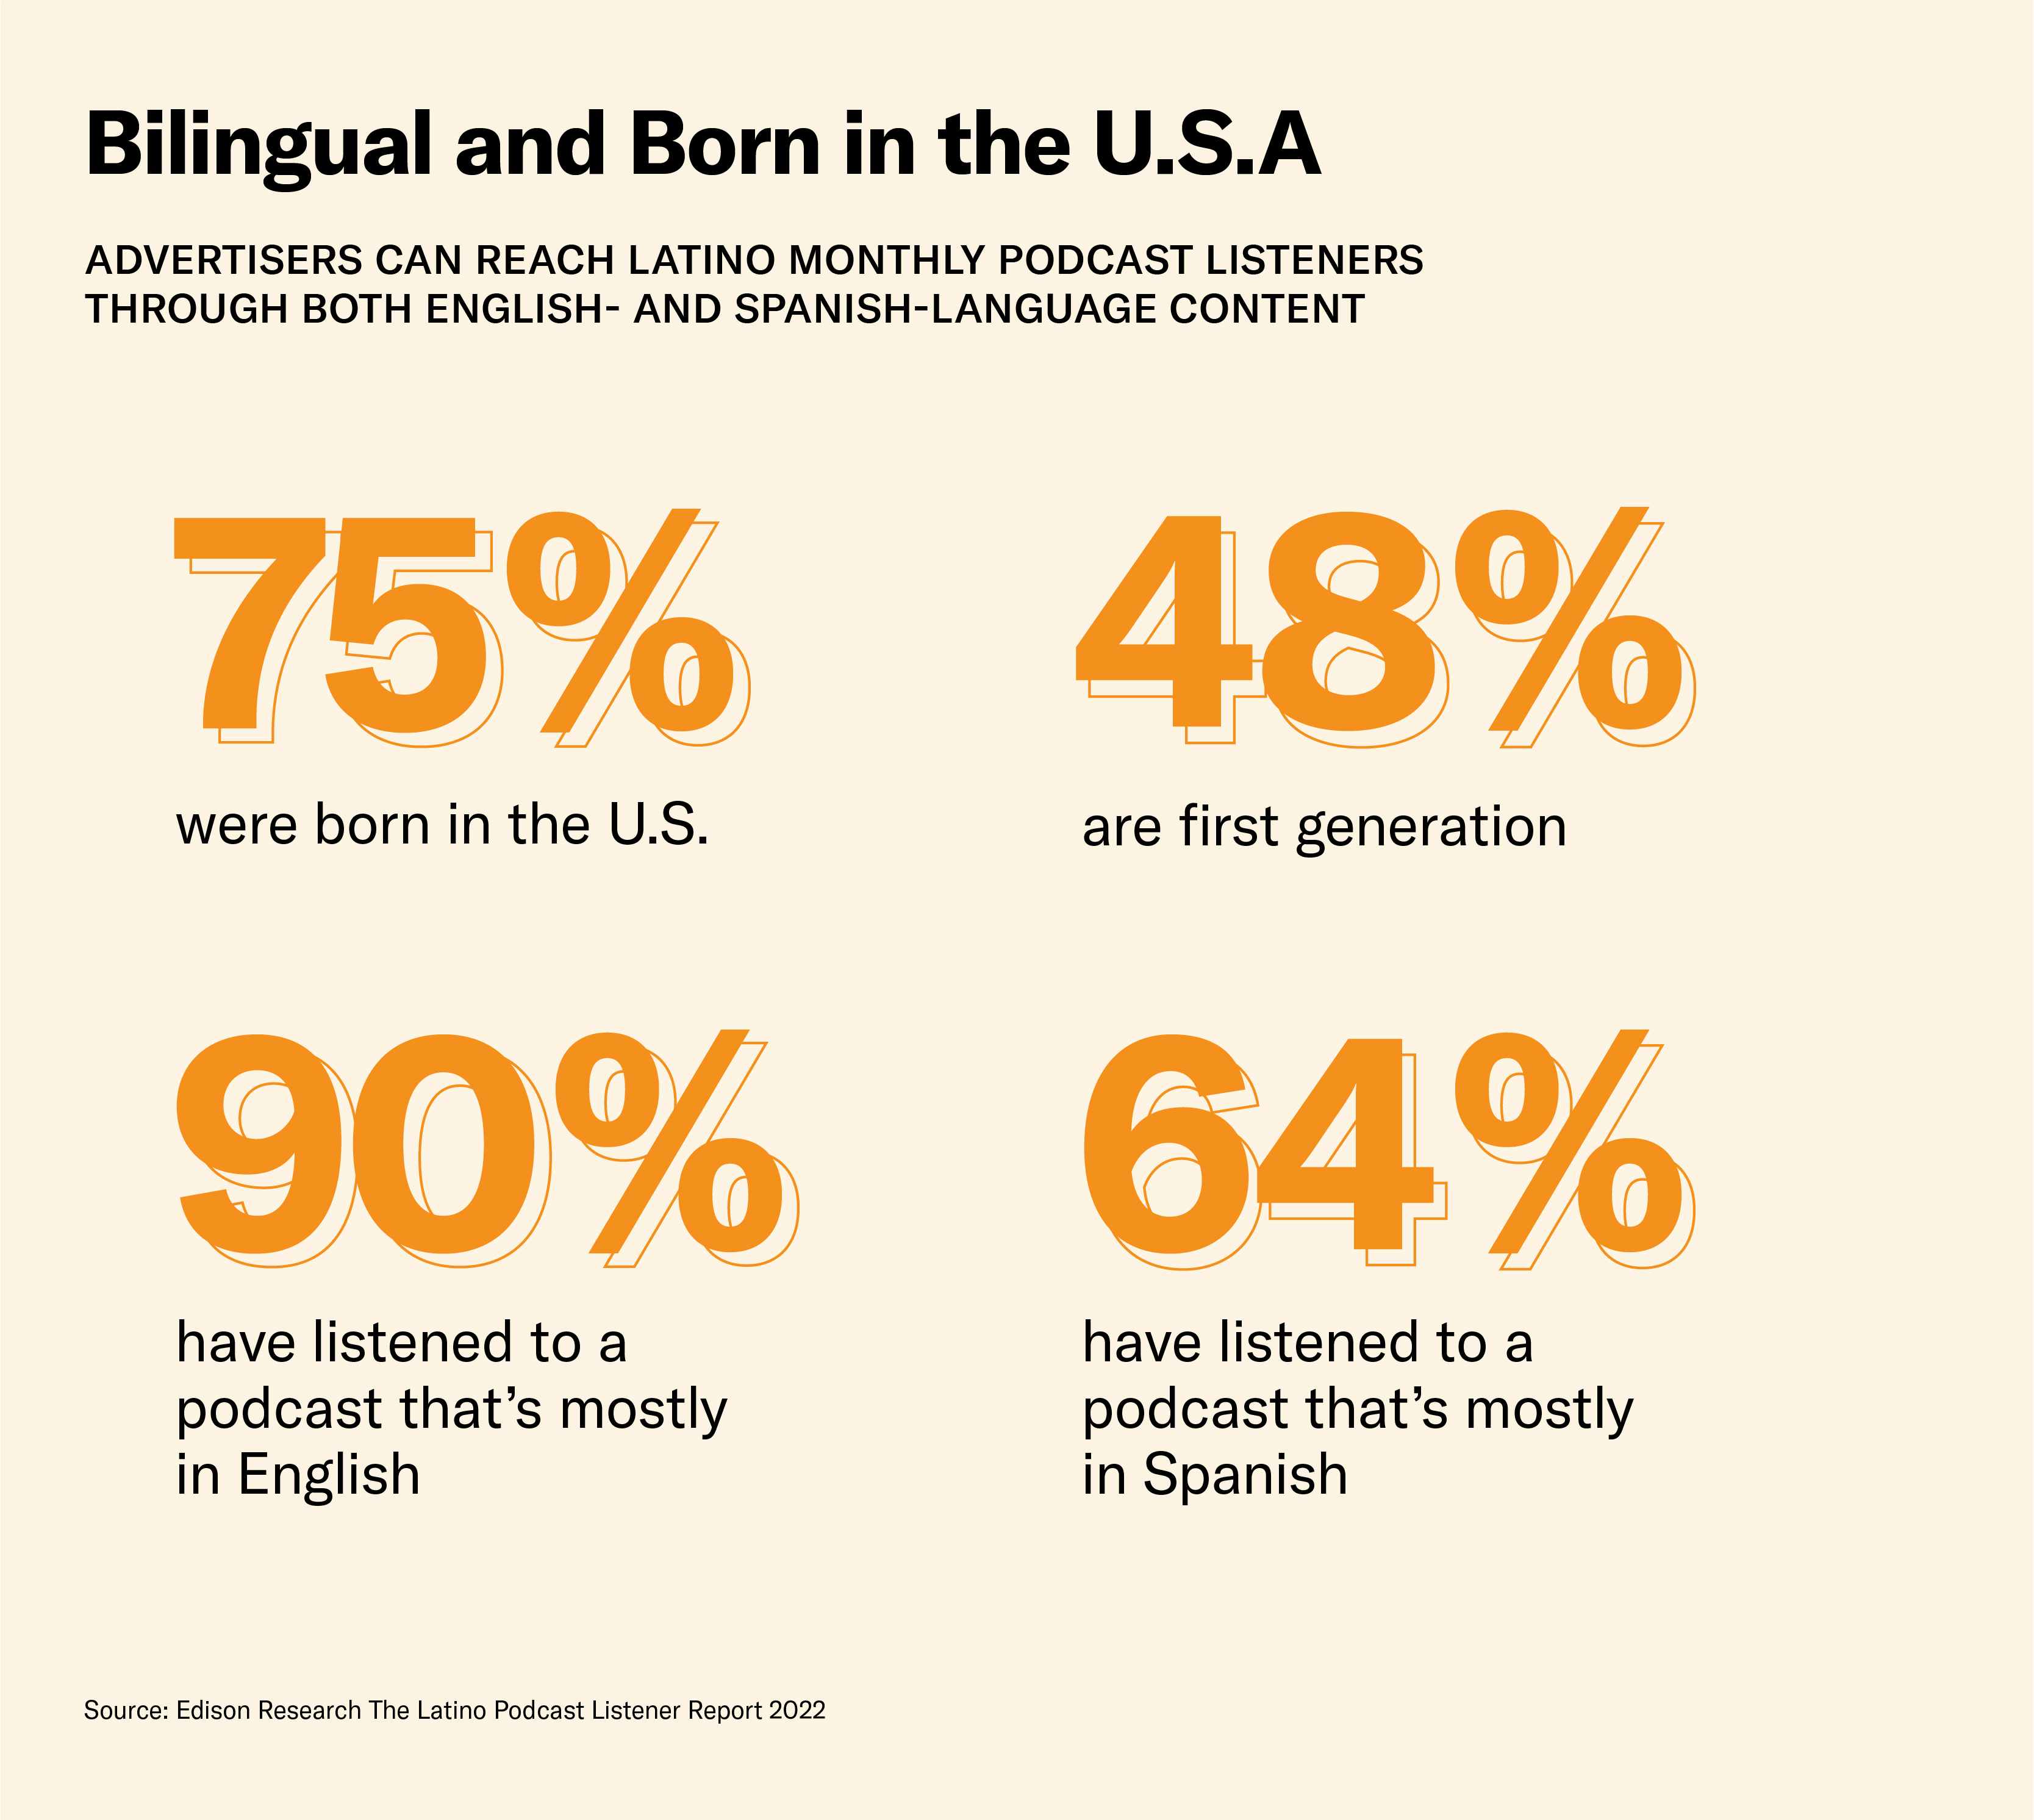 Latino podcast listeners listen in English and Spanish